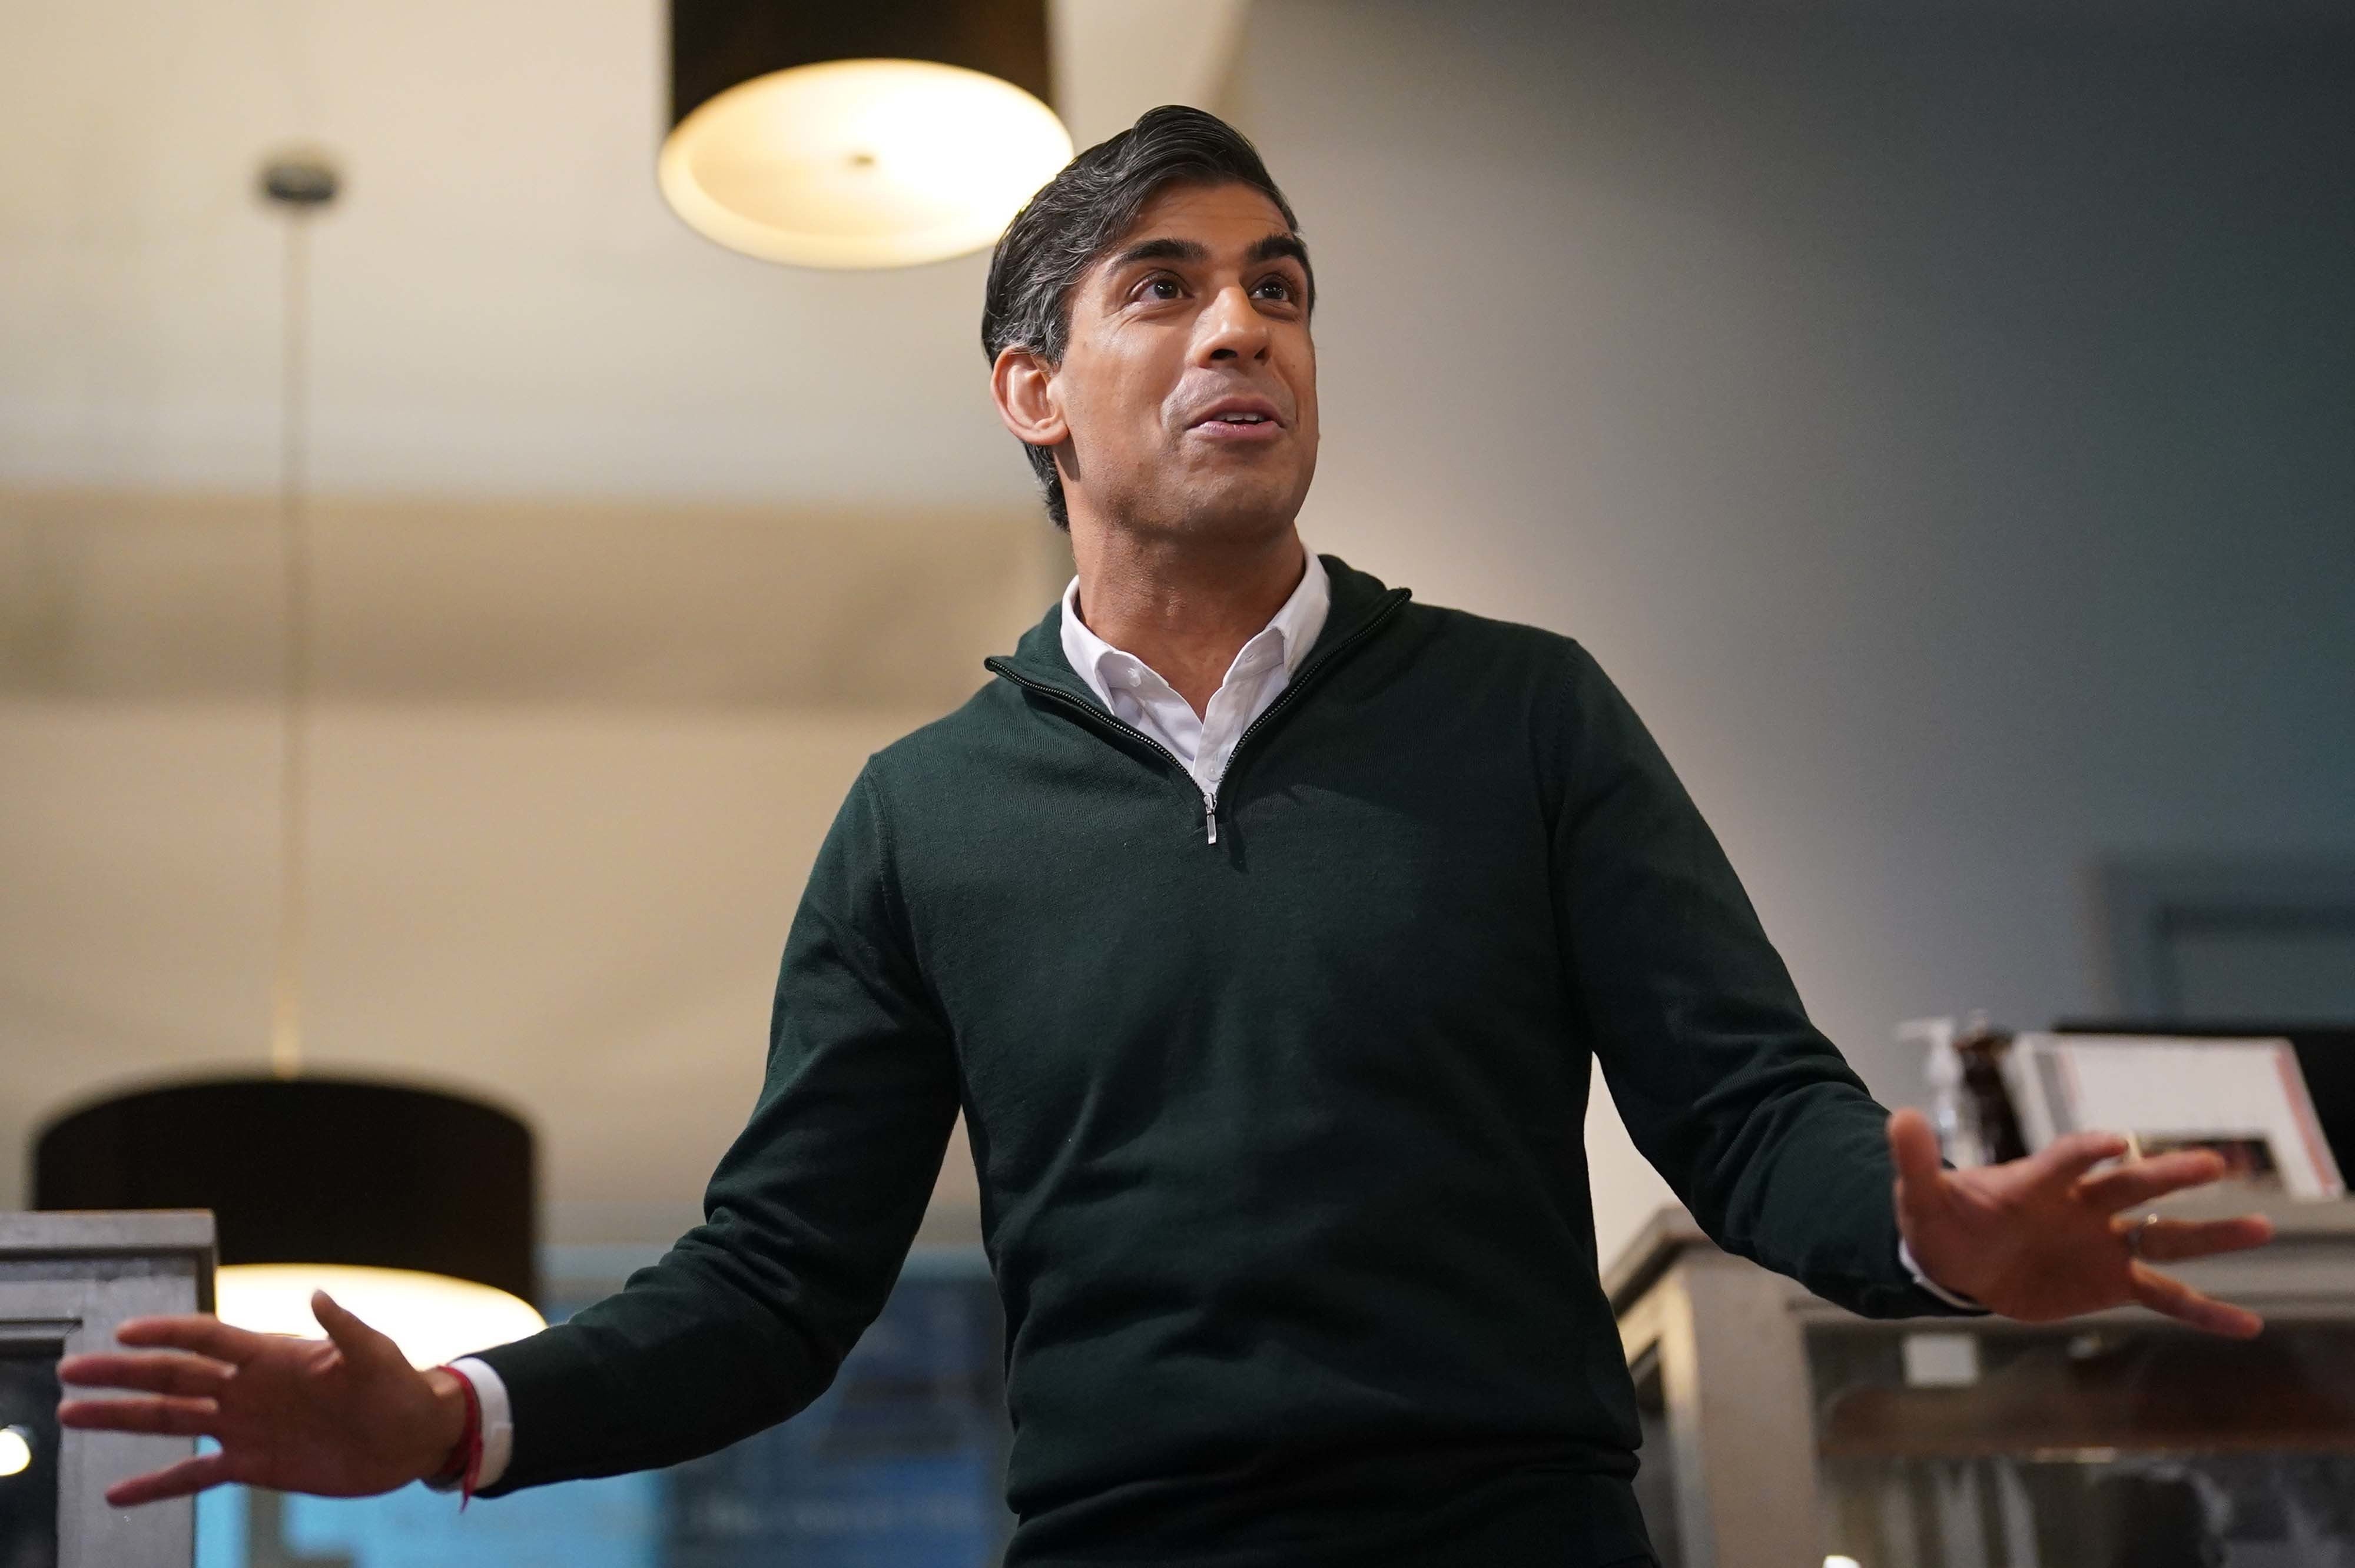 Rishi Sunak’s pitch will be: the economy is on the right track, don’t let Labour ruin it